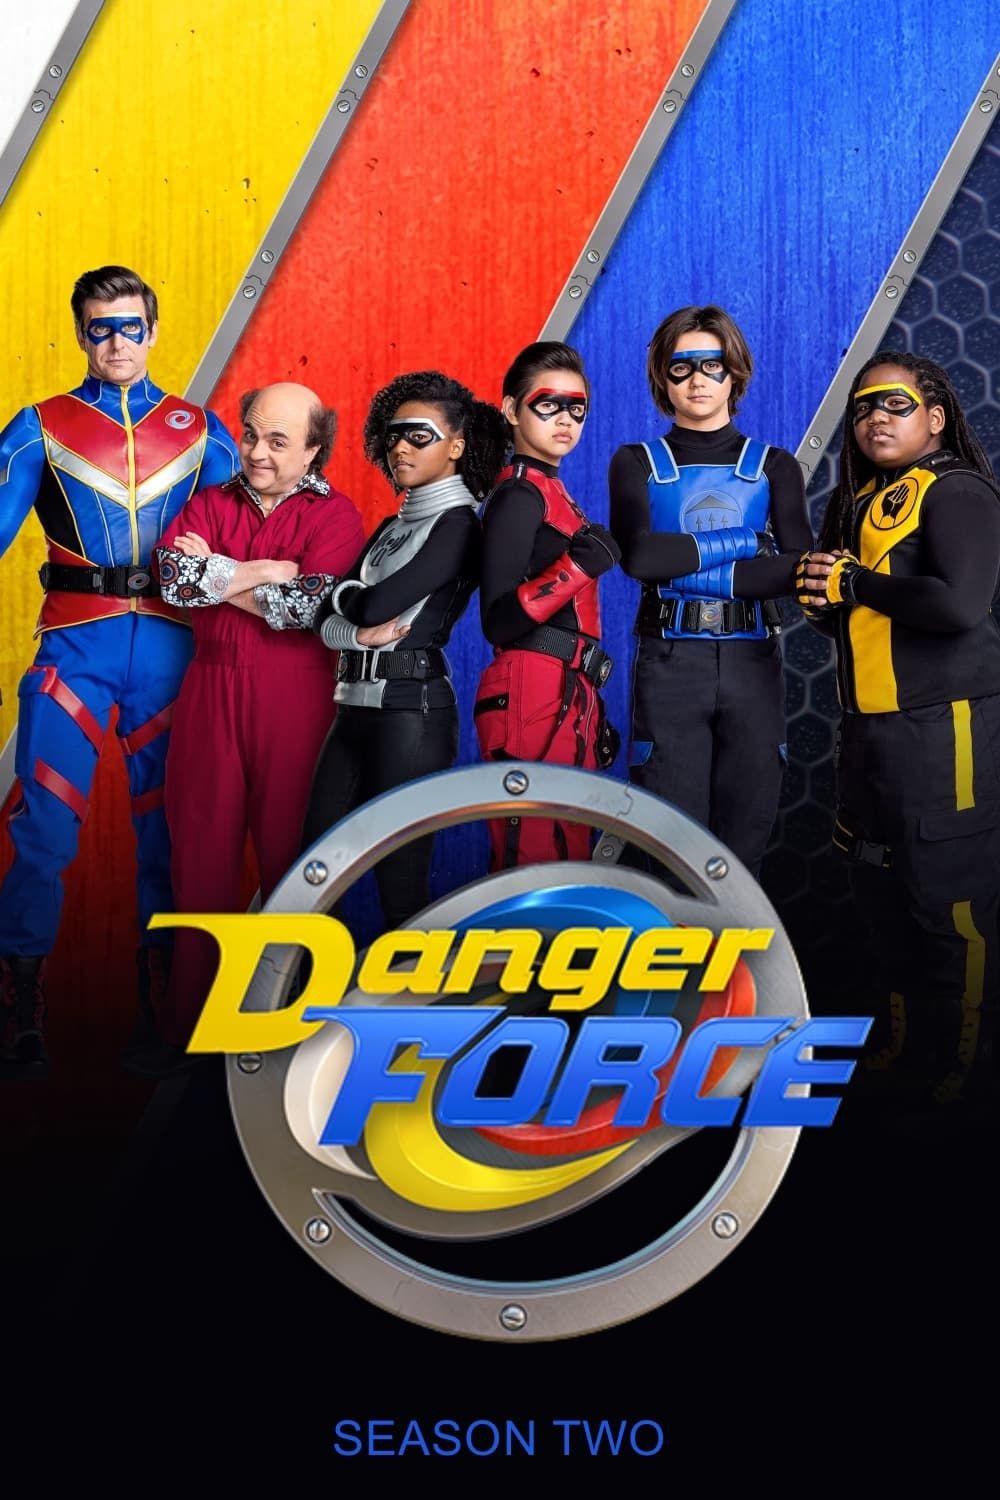 JJJ Exclusive: Nickelodeon's 'Henry Danger' Is Crossing Over With 'The  Thundermans'!, Exclusive, Henry Danger, The Thundermans